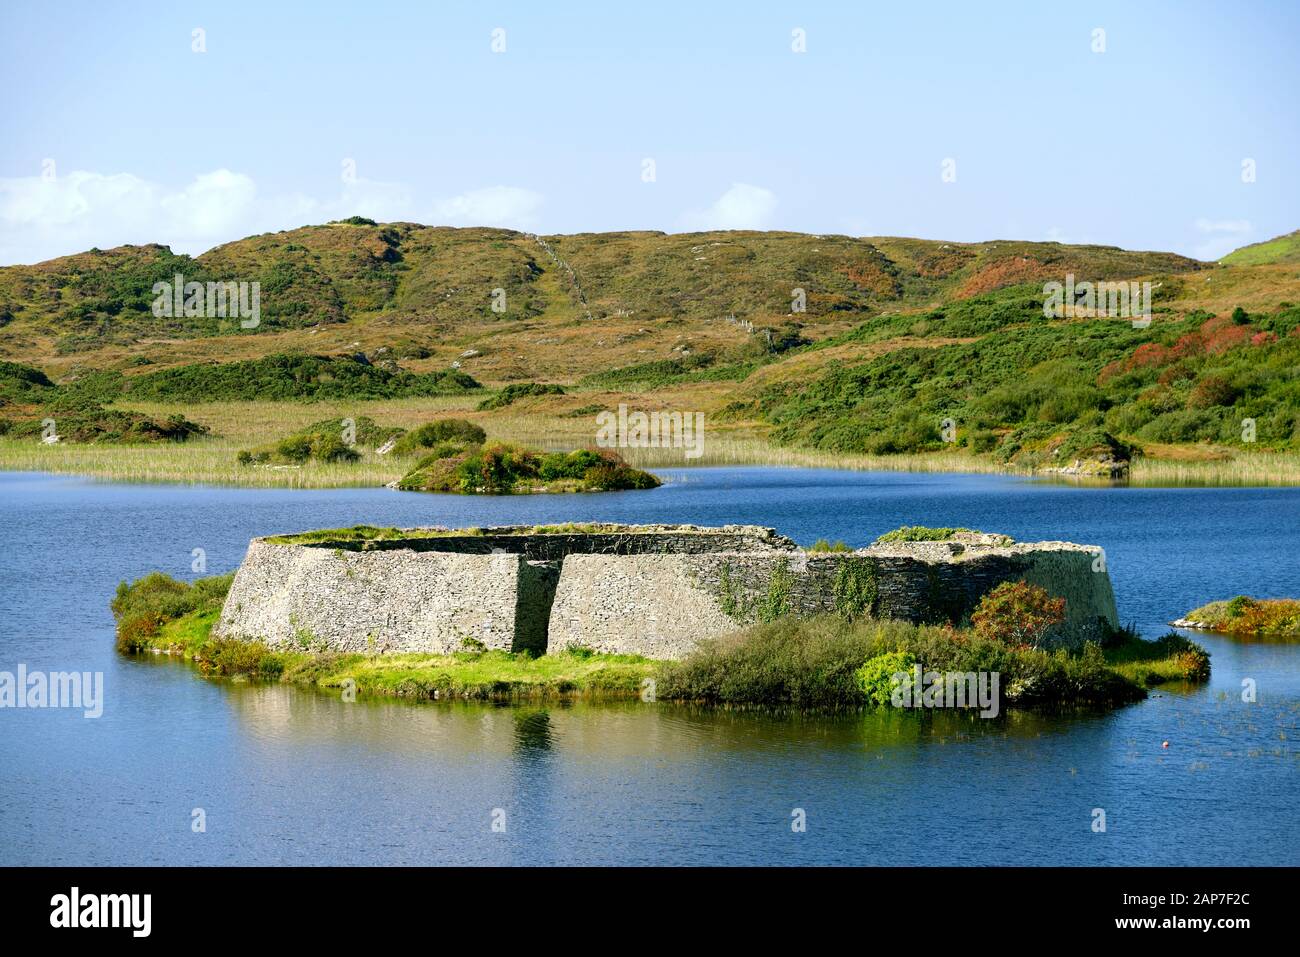 Doon Fort prehistoric stone cashel caiseal or dun. Pre Christian refuge on small crannog lake isle in Doon Lough near Ardara, Donegal, Ireland Stock Photo